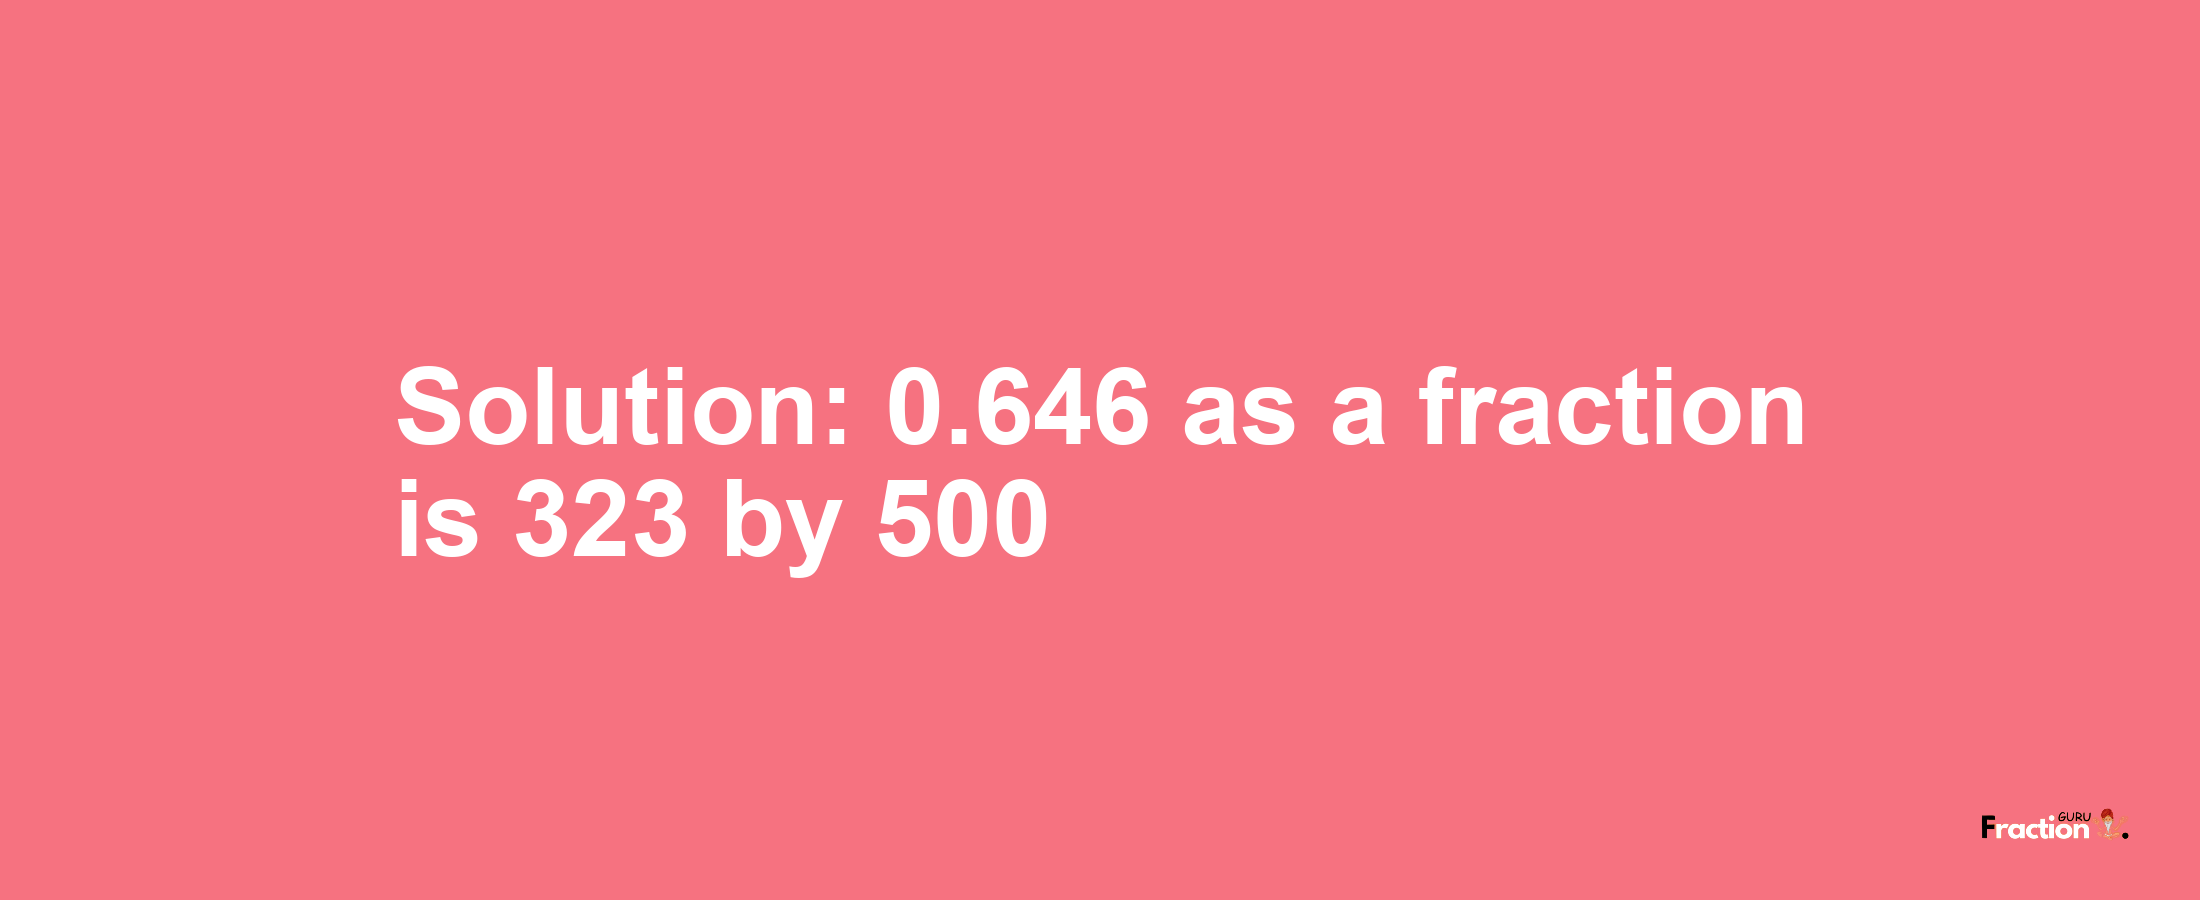 Solution:0.646 as a fraction is 323/500